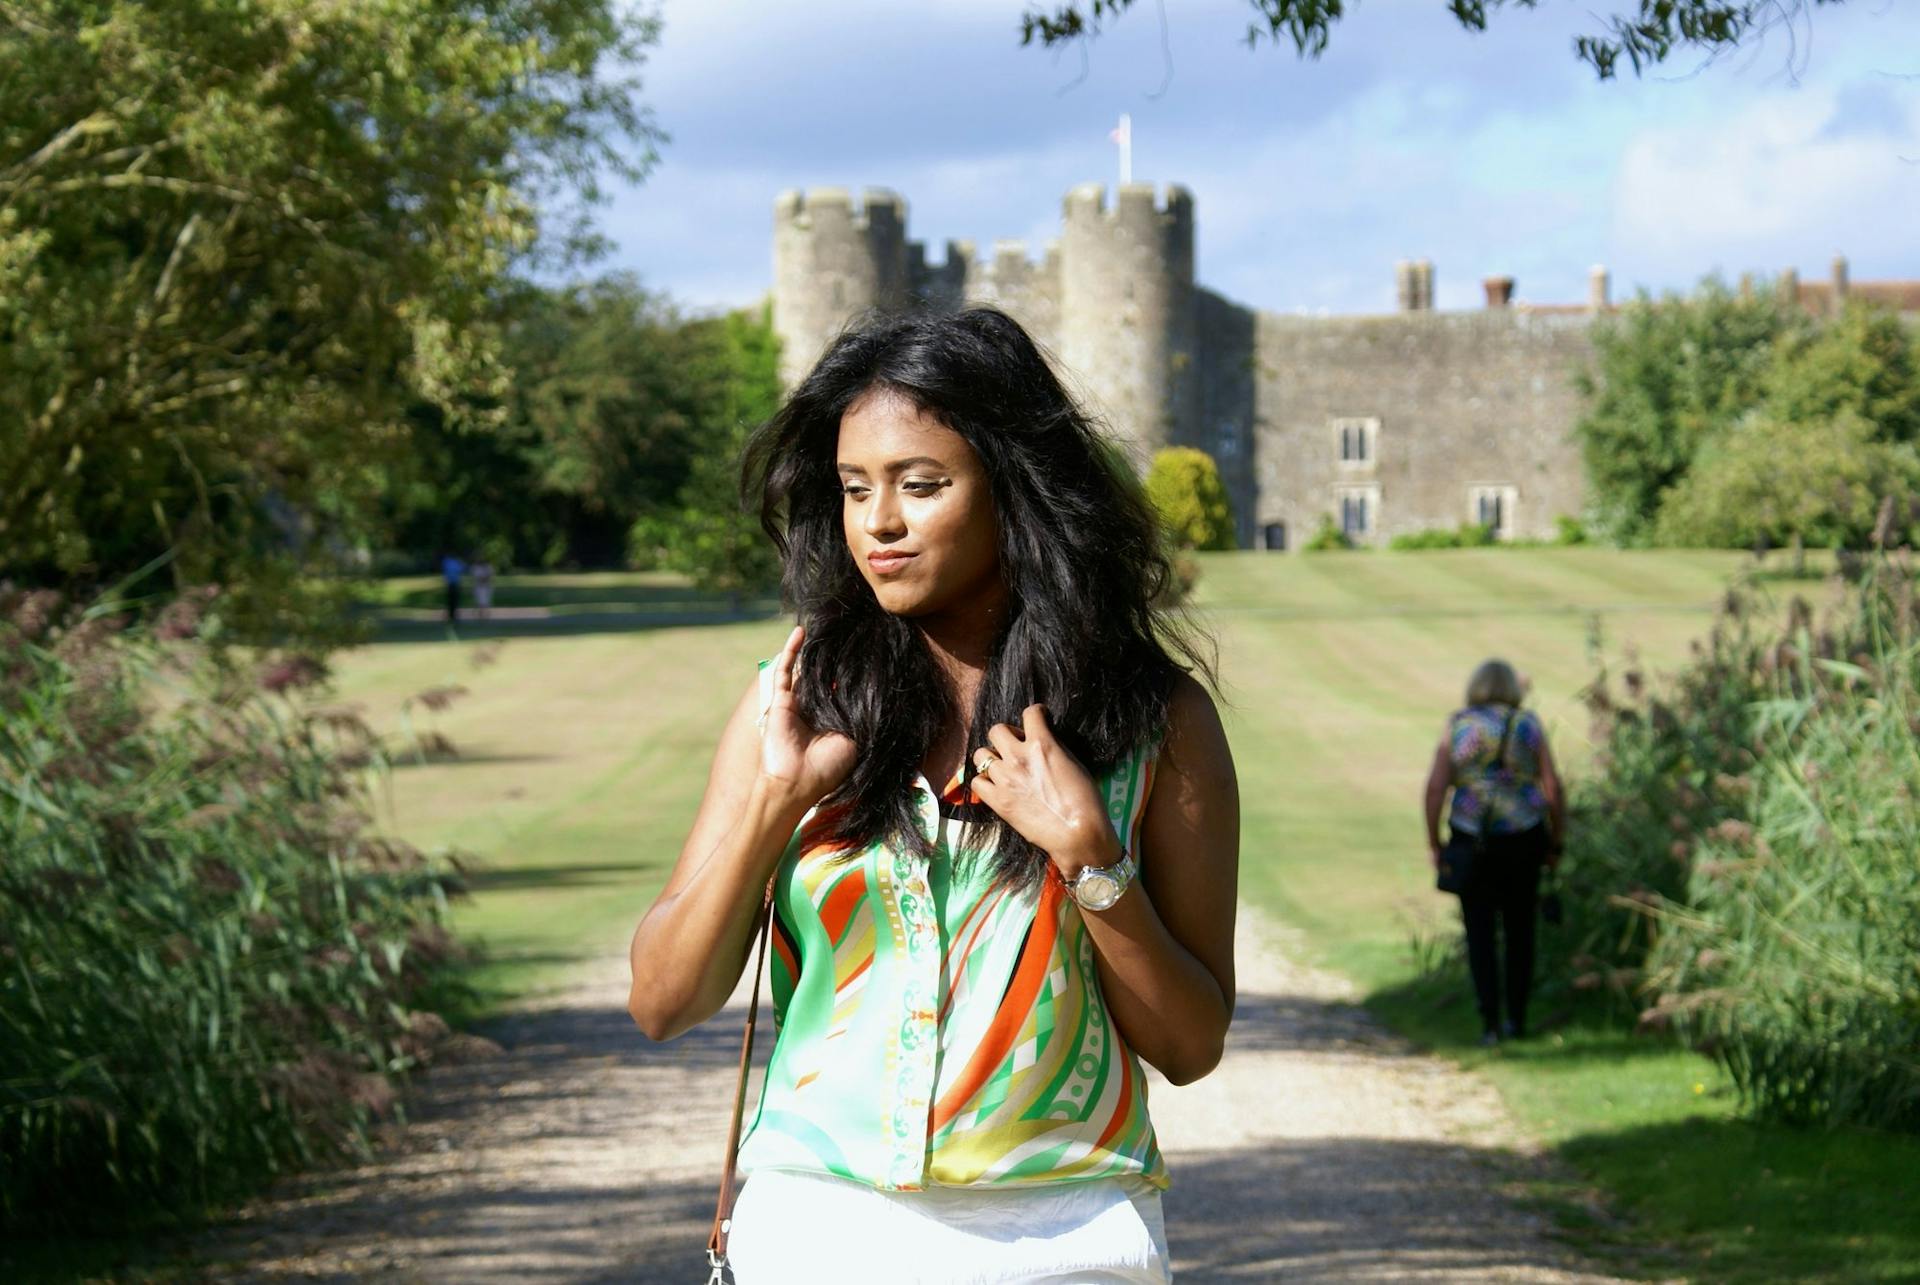 Sachini in front of a castle